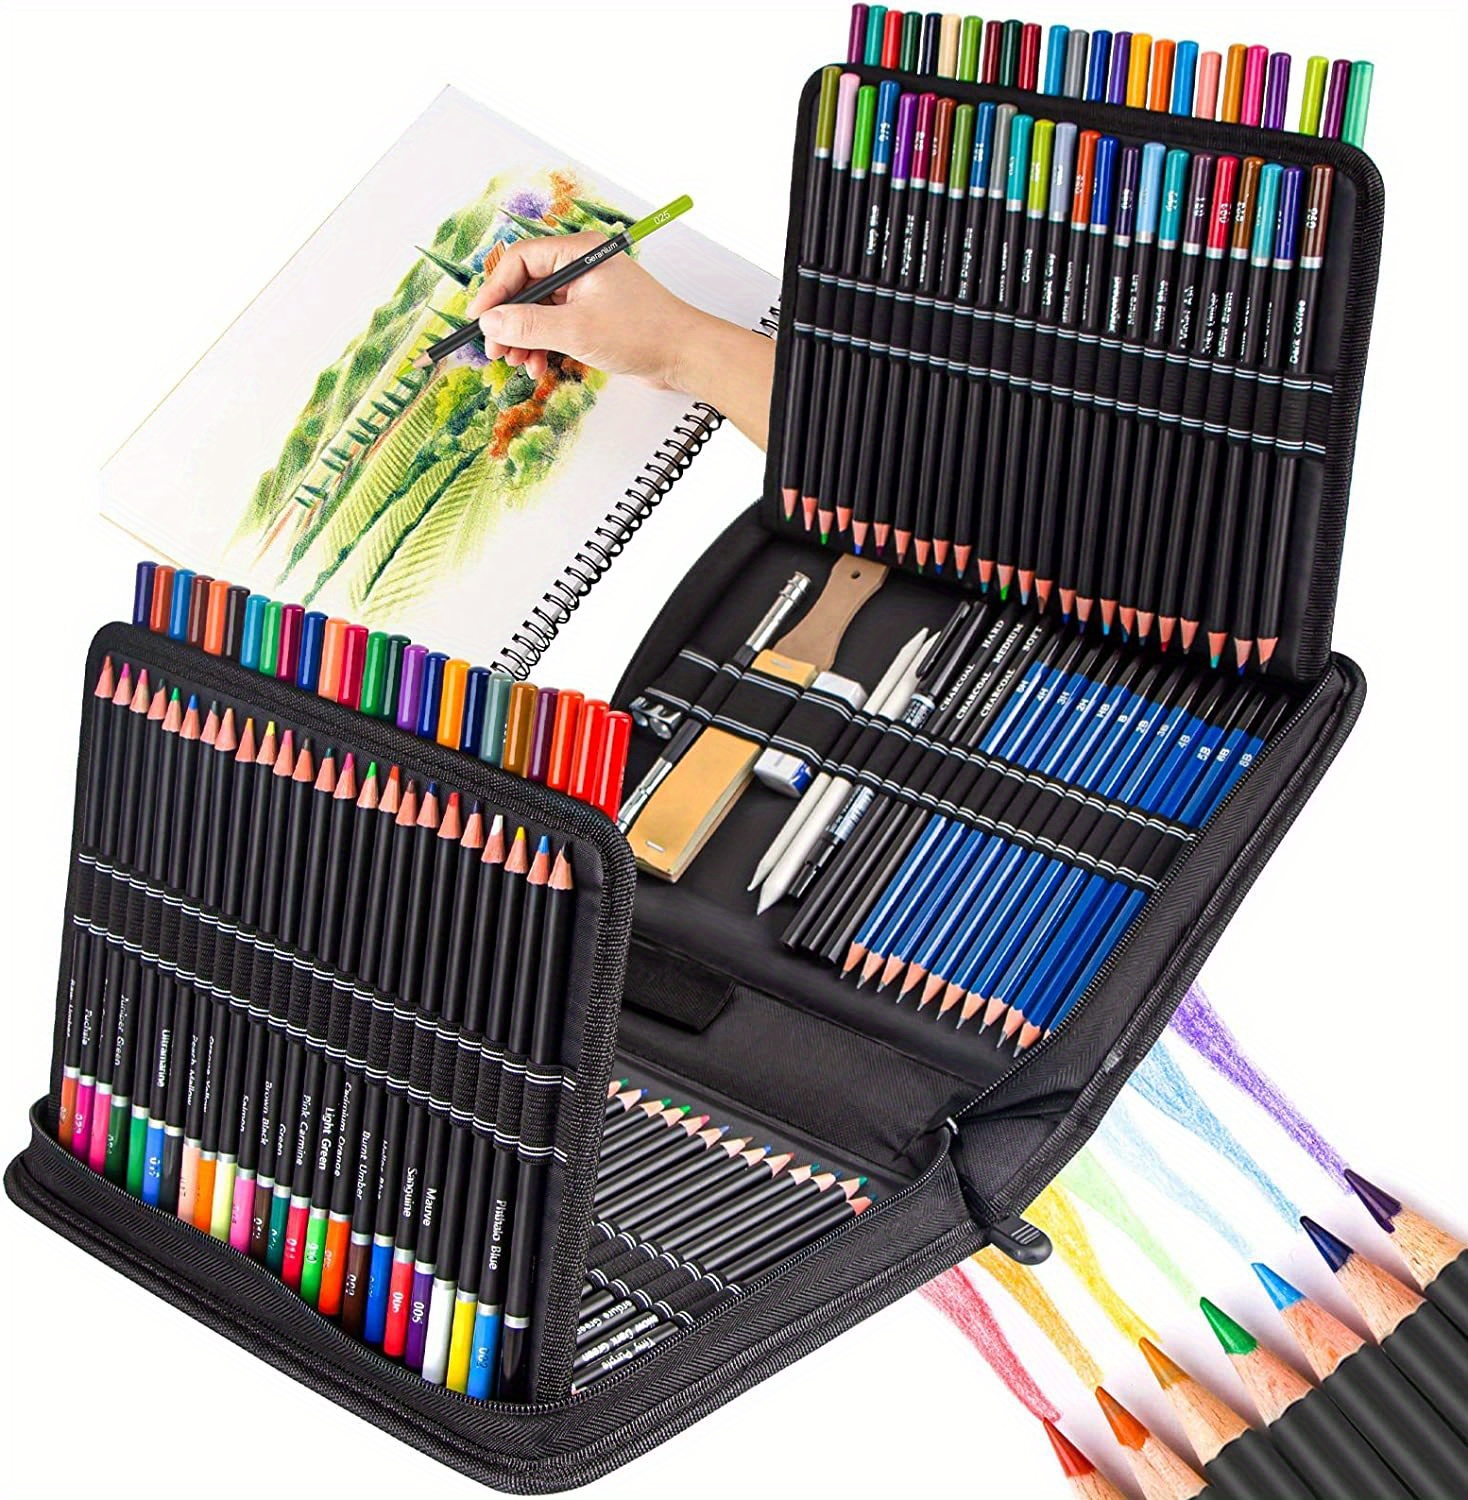 Colored Pencils , Art Supplies for Drawing, Sketching, Adult Coloring ,  Soft Core Color Pencils, 126 picse Contains accessories